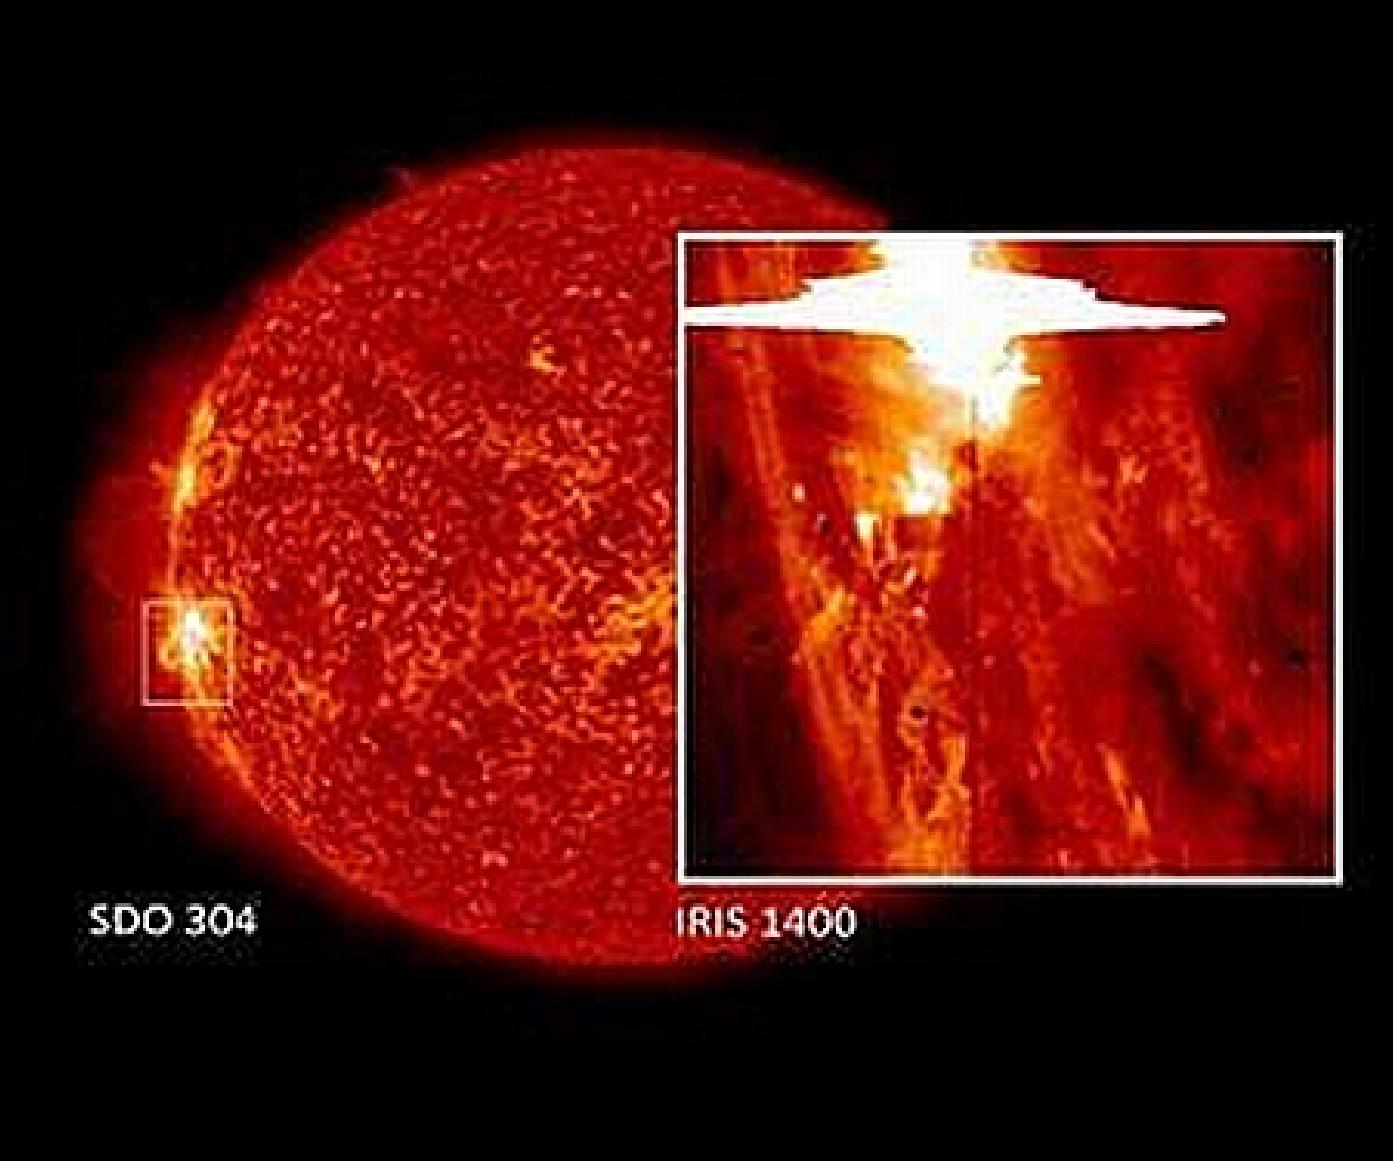 Figure 21: On Jan. 28, 2014, the IRIS observatory observed its strongest solar flare to date (image credit: NASA/GSFC, IRIS, SDO)